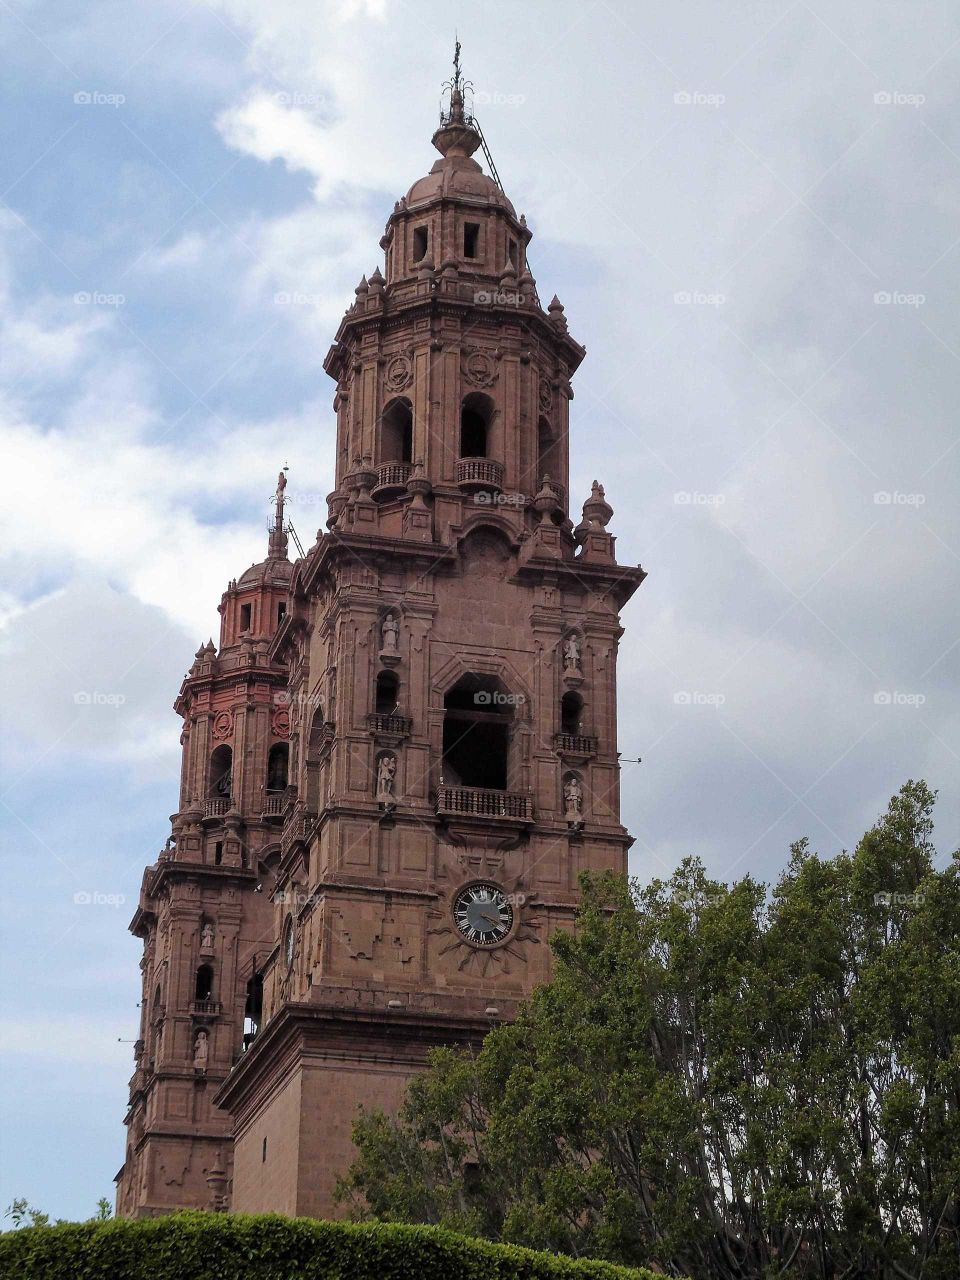 towers of the Morelia Cathedral against a clouded sky